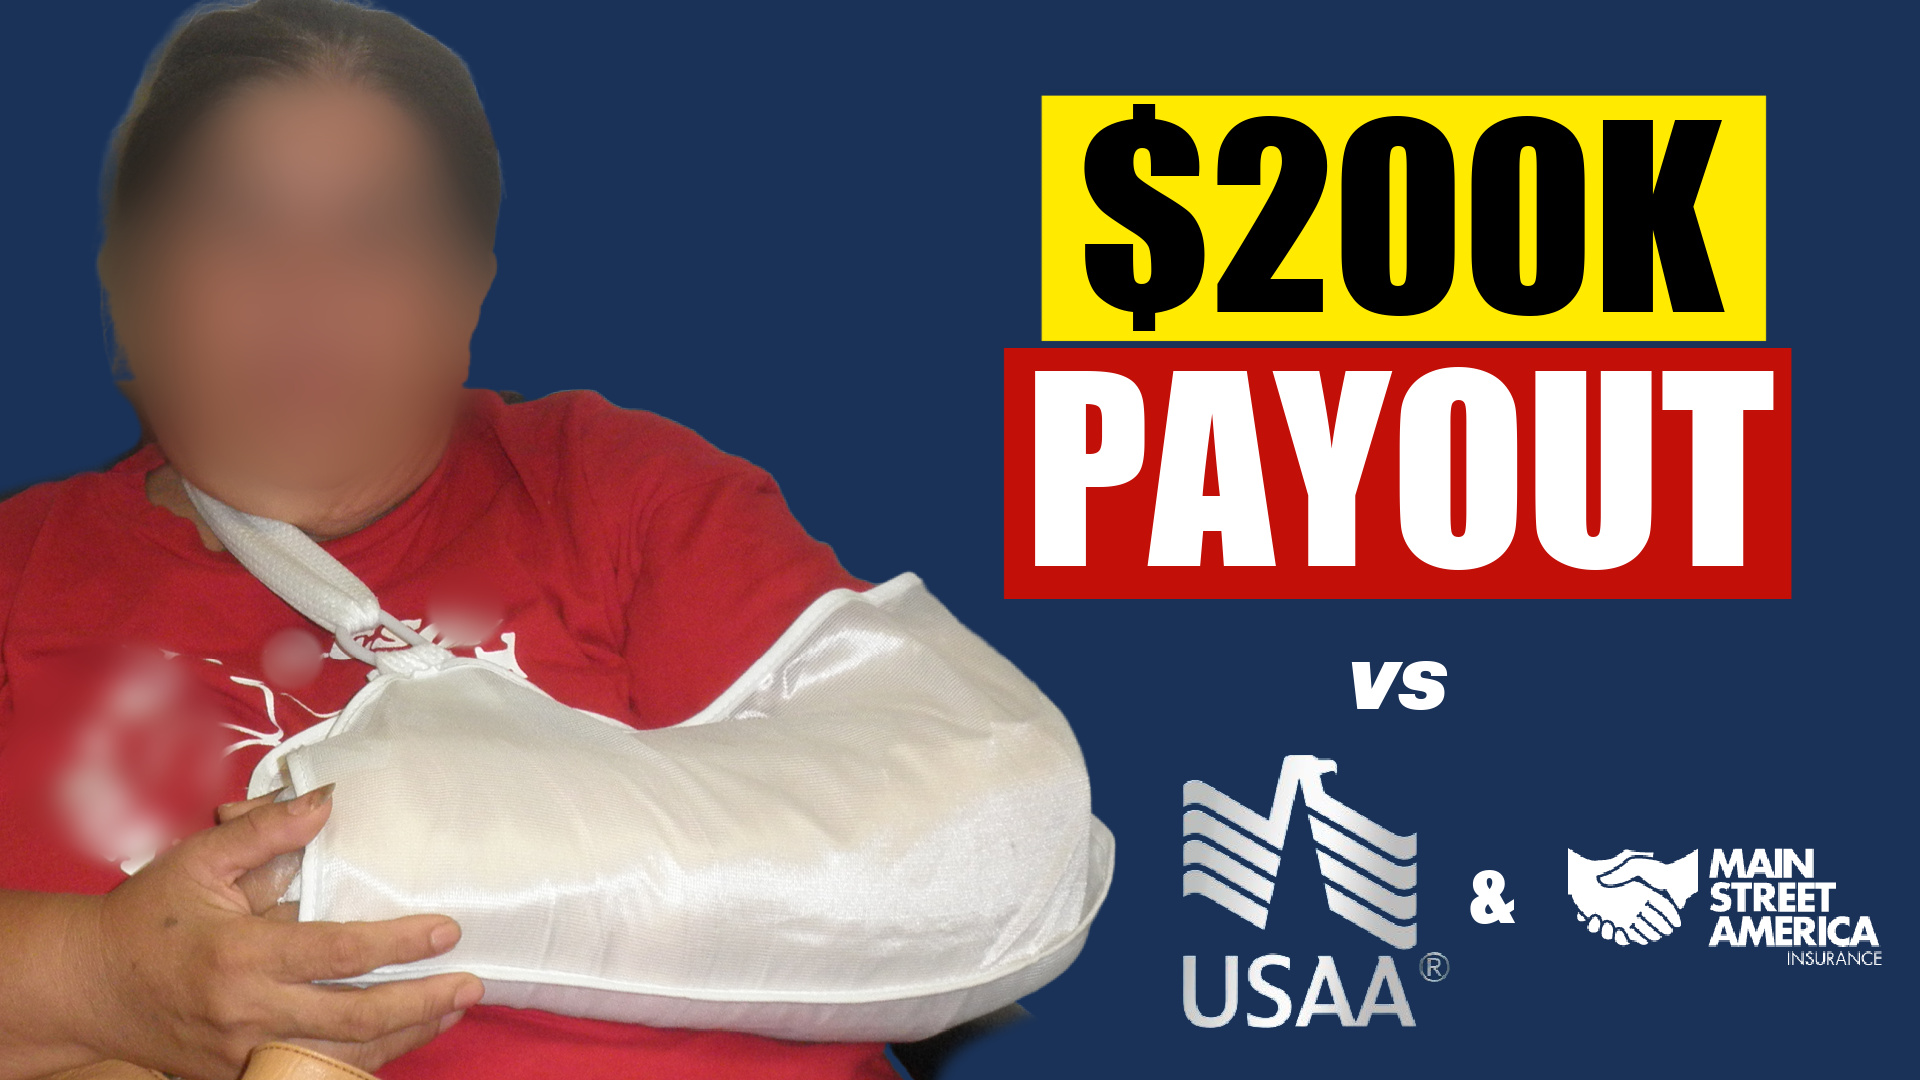 broken wrist (arm) in sling. $200K Payout vs USAA and Main Street America Group